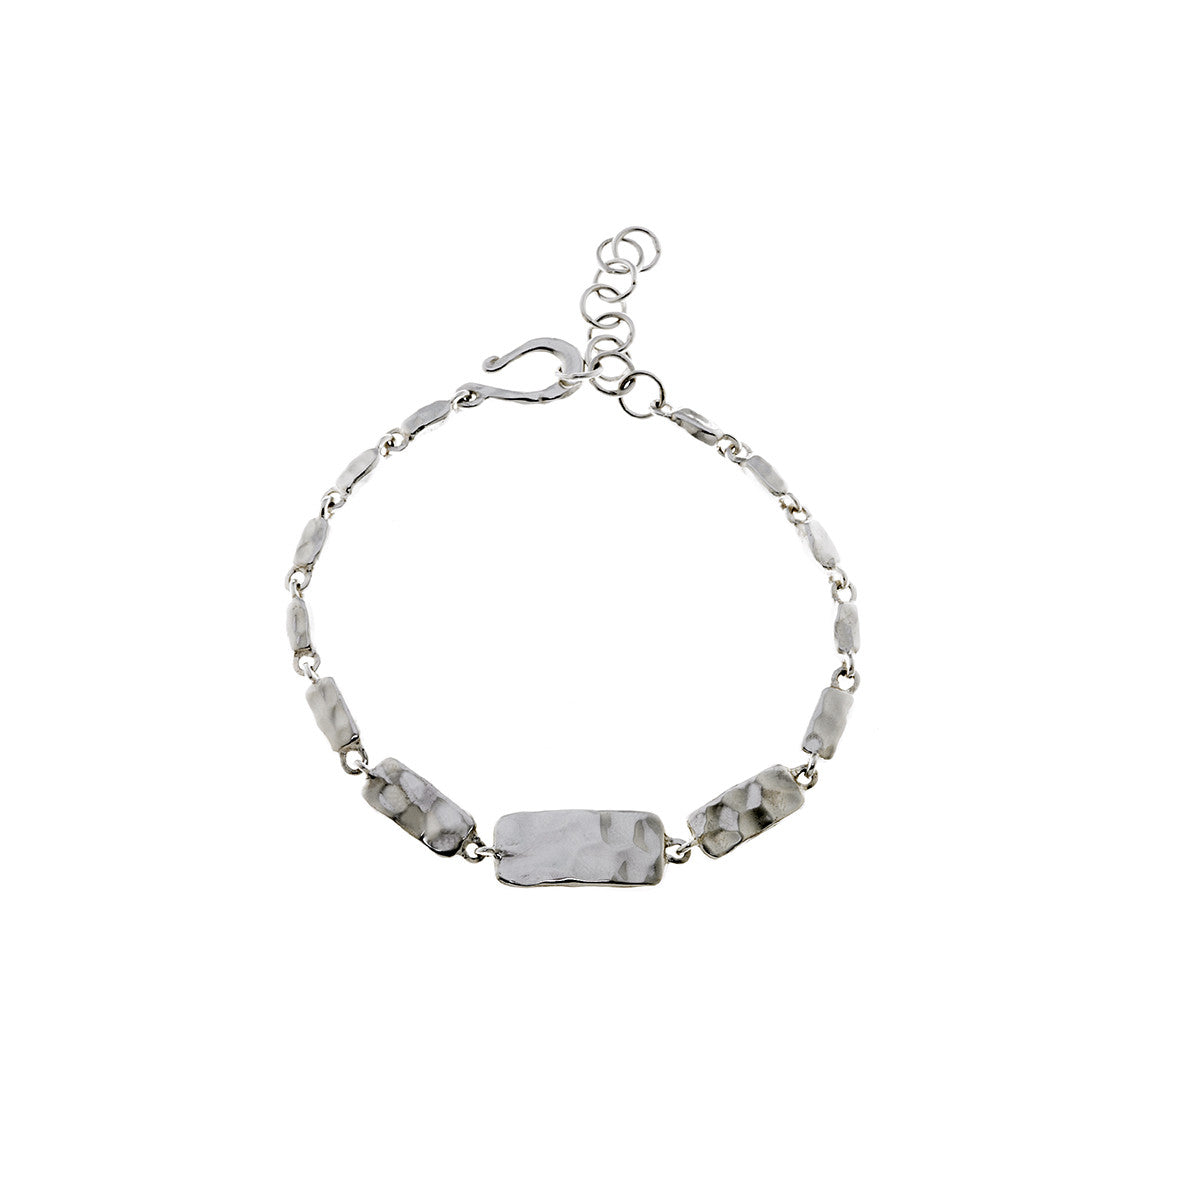 Mystical Pagoda Solid Cube Sterling Silver Bracelet - Cynthia Gale New York Jewelry